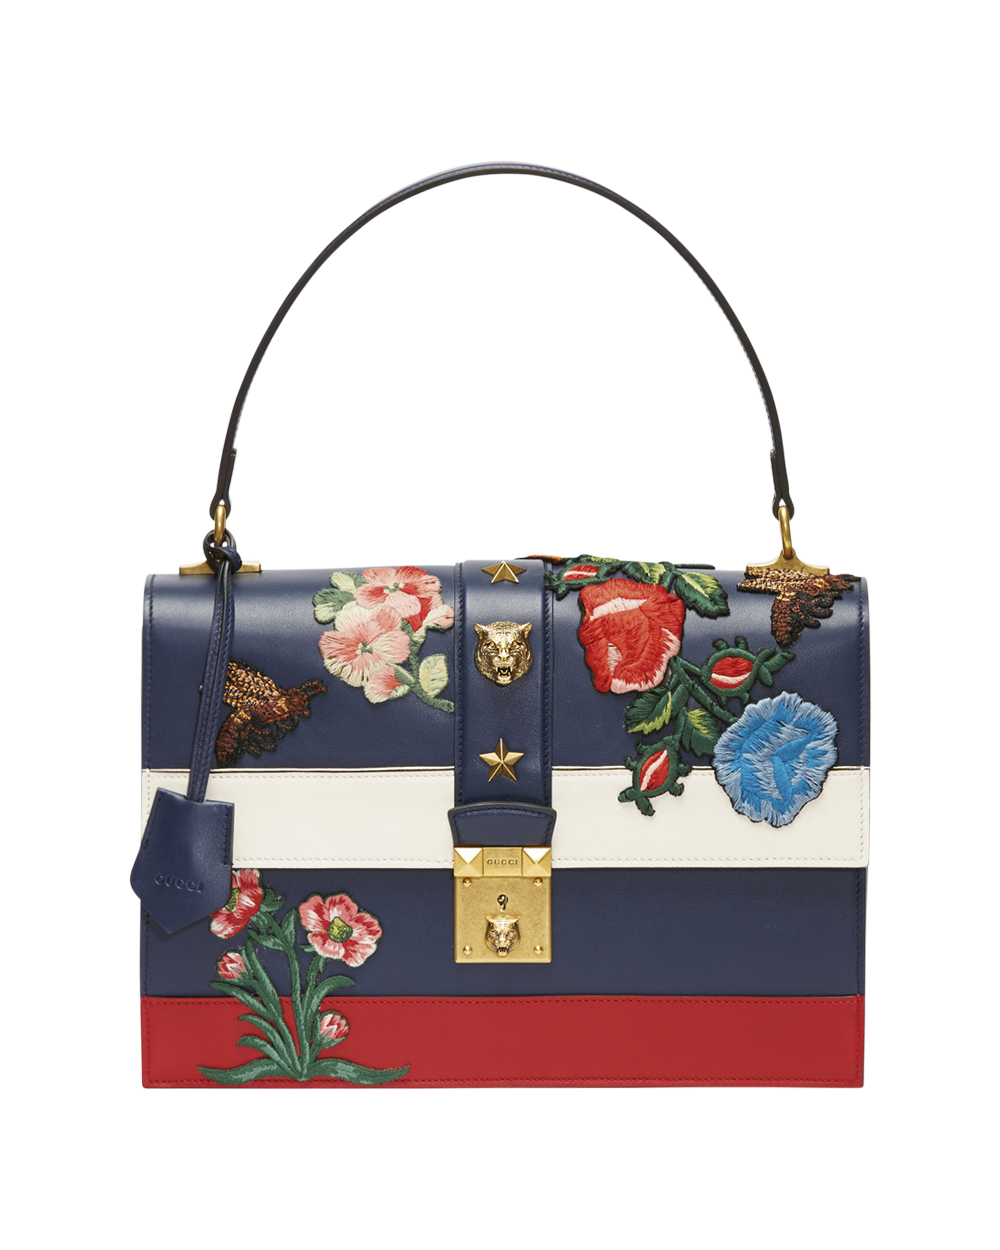 Bag, $4,820, by Gucci.